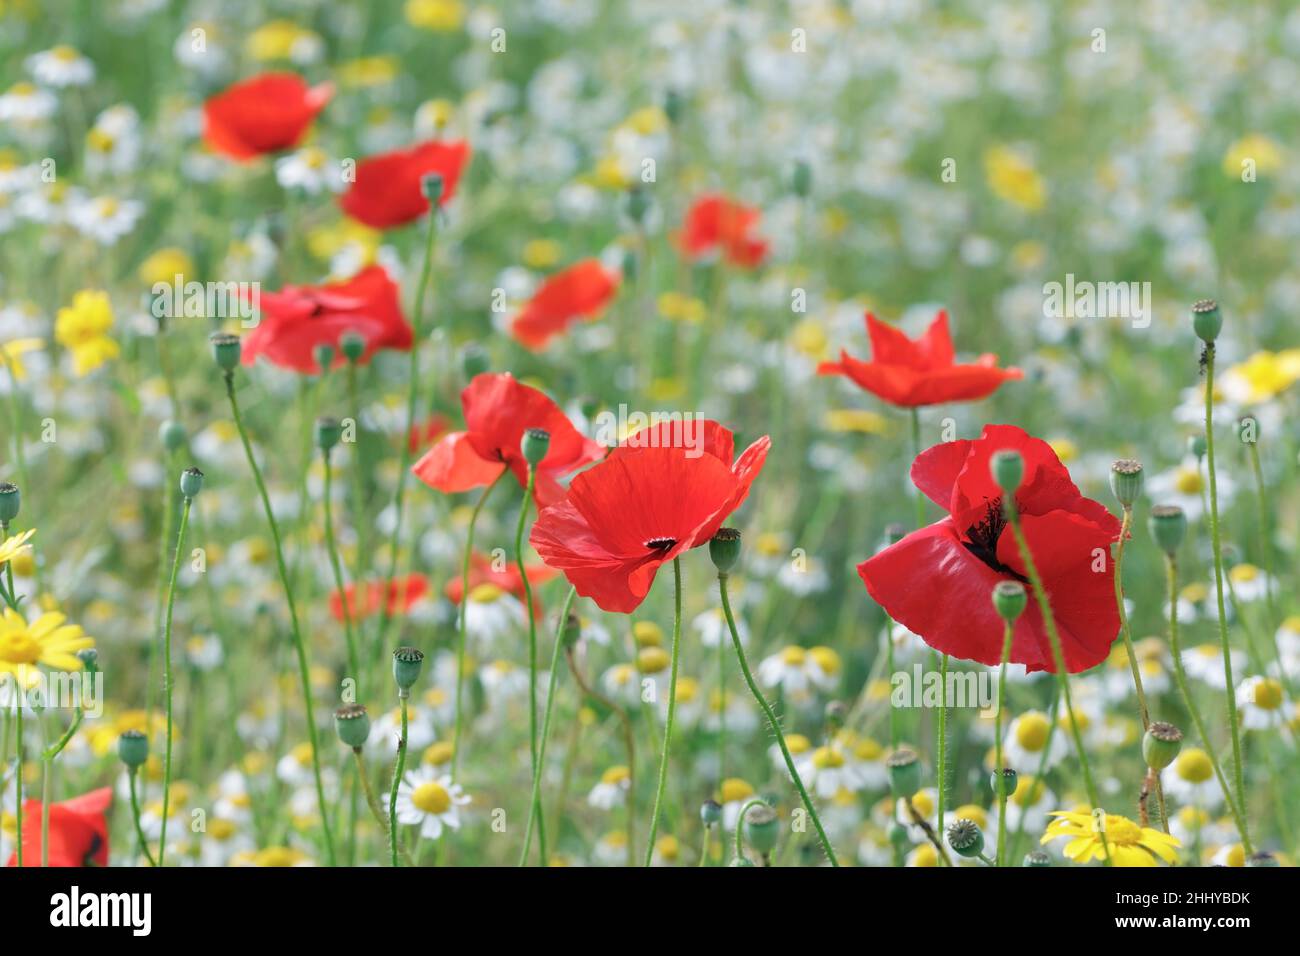 Papaver rhoeas. Poppies in a wildflower meadow. Stock Photo